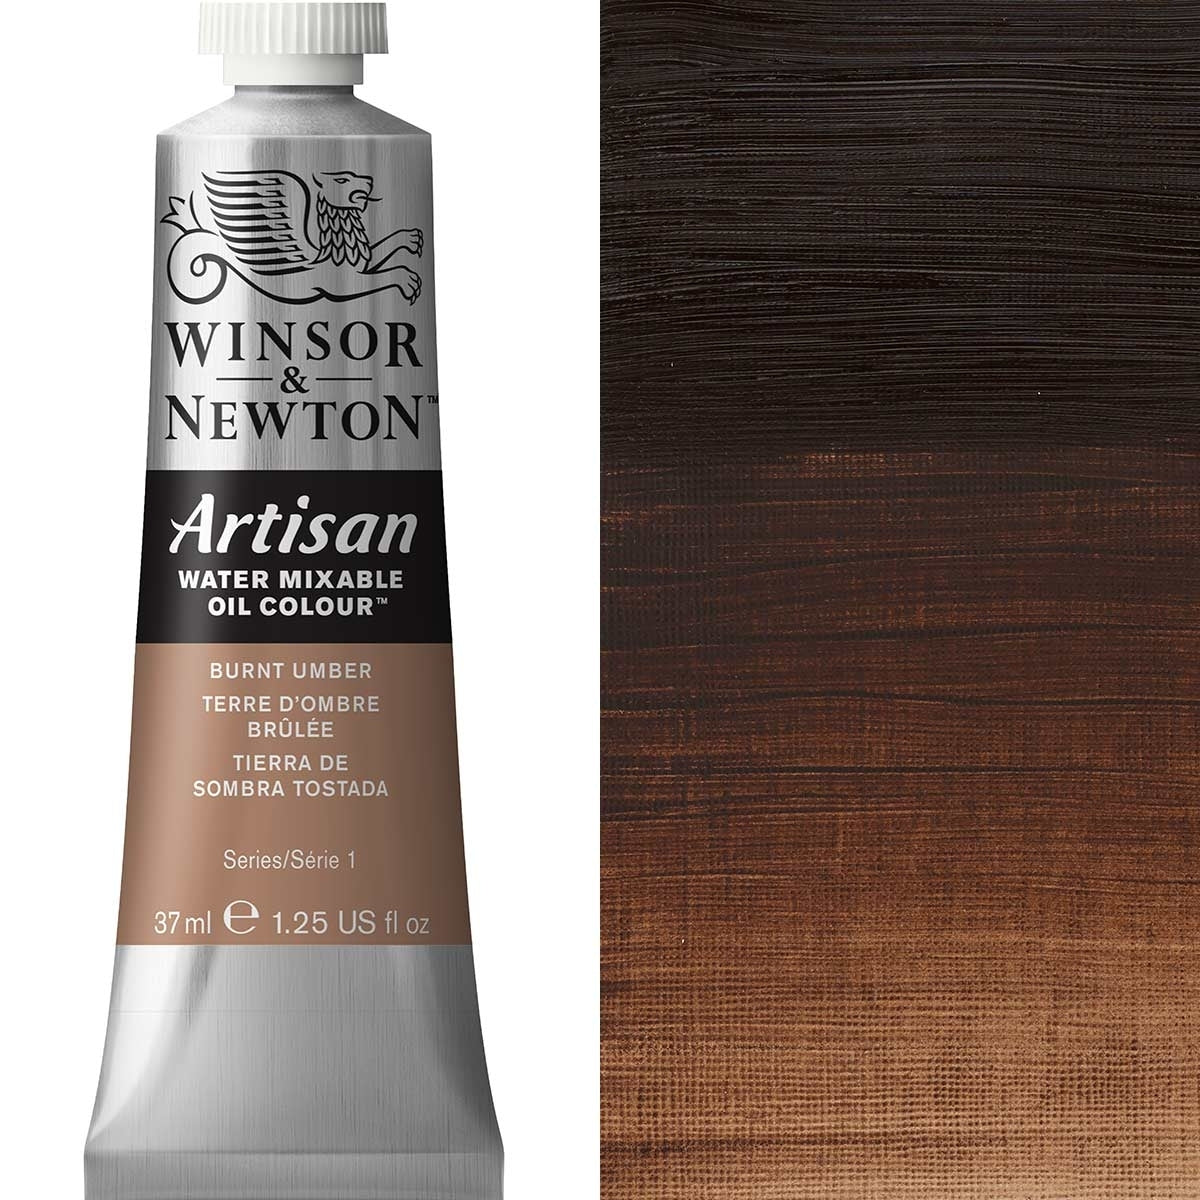 Winsor and Newton - Artisan Oil Colour Watermixable - 37ml - Burnt Umber